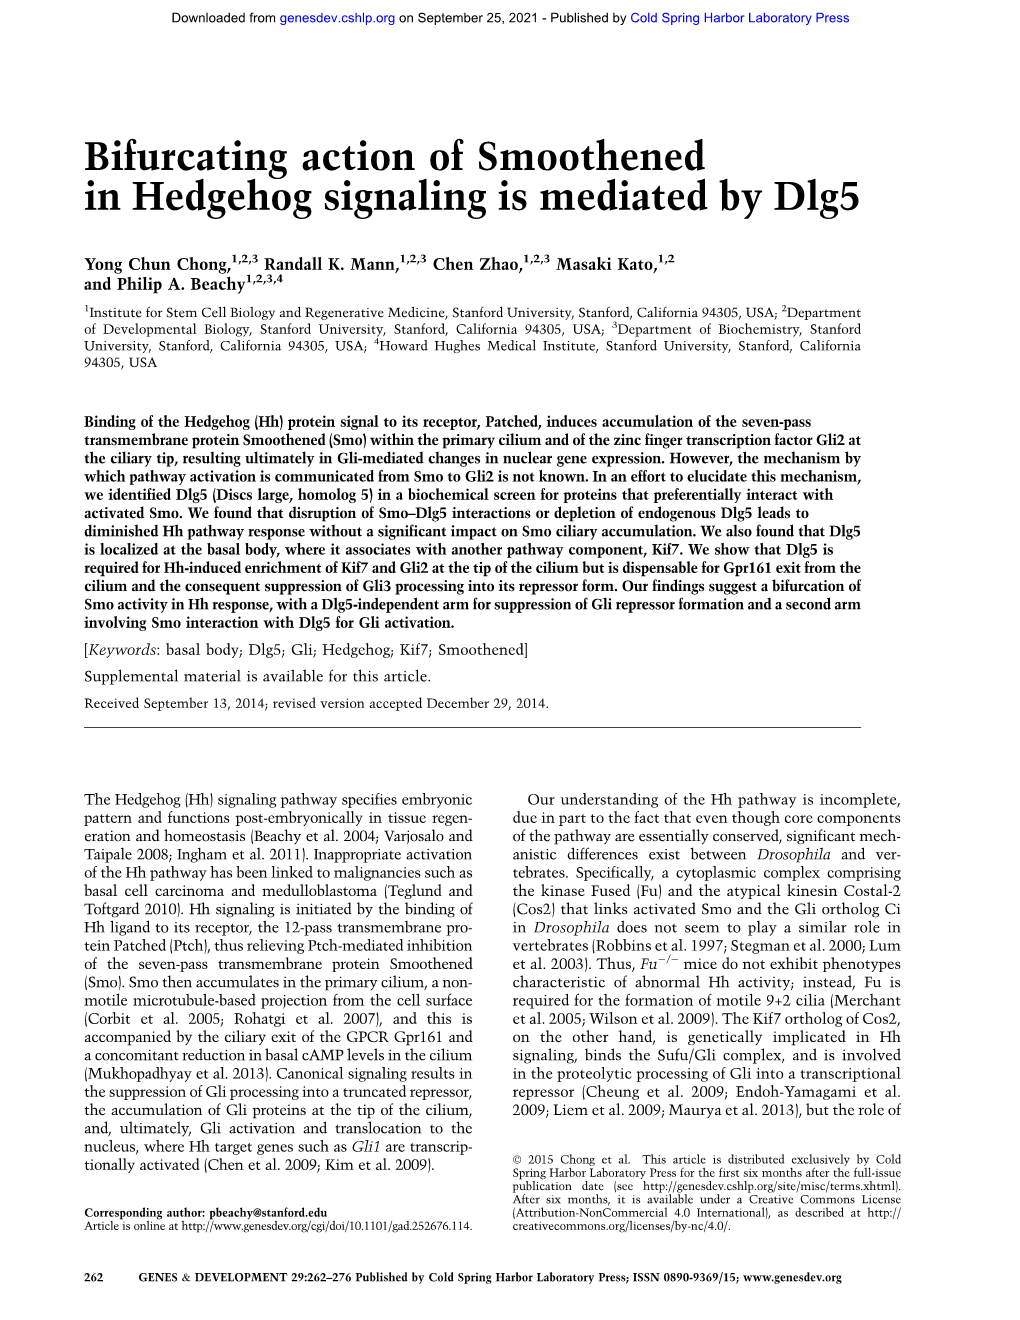 Bifurcating Action of Smoothened in Hedgehog Signaling Is Mediated by Dlg5